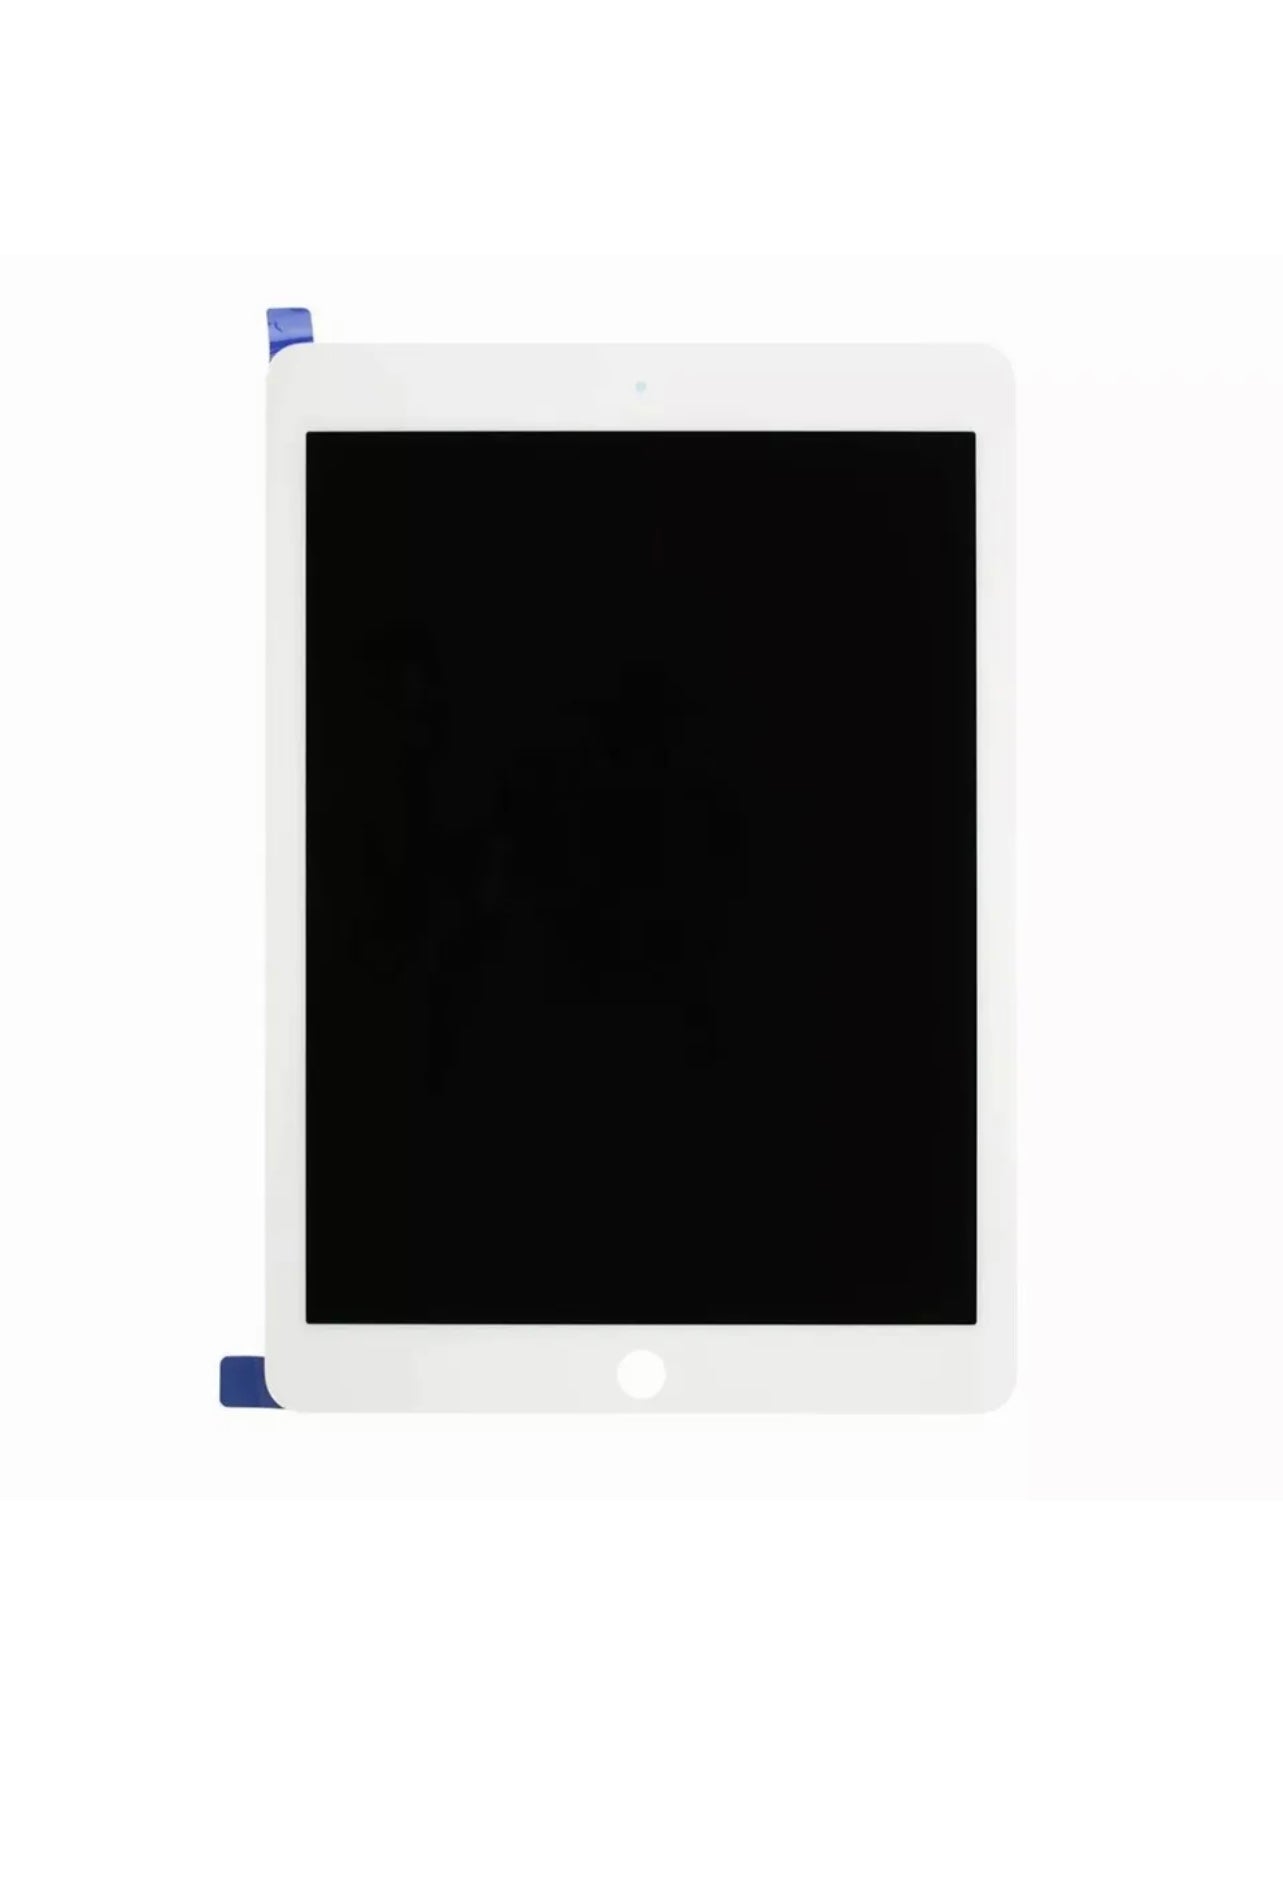 iPad Pro 9.7 (2016) Lcd Sceen Display Touch  A1673 A1674 A1675